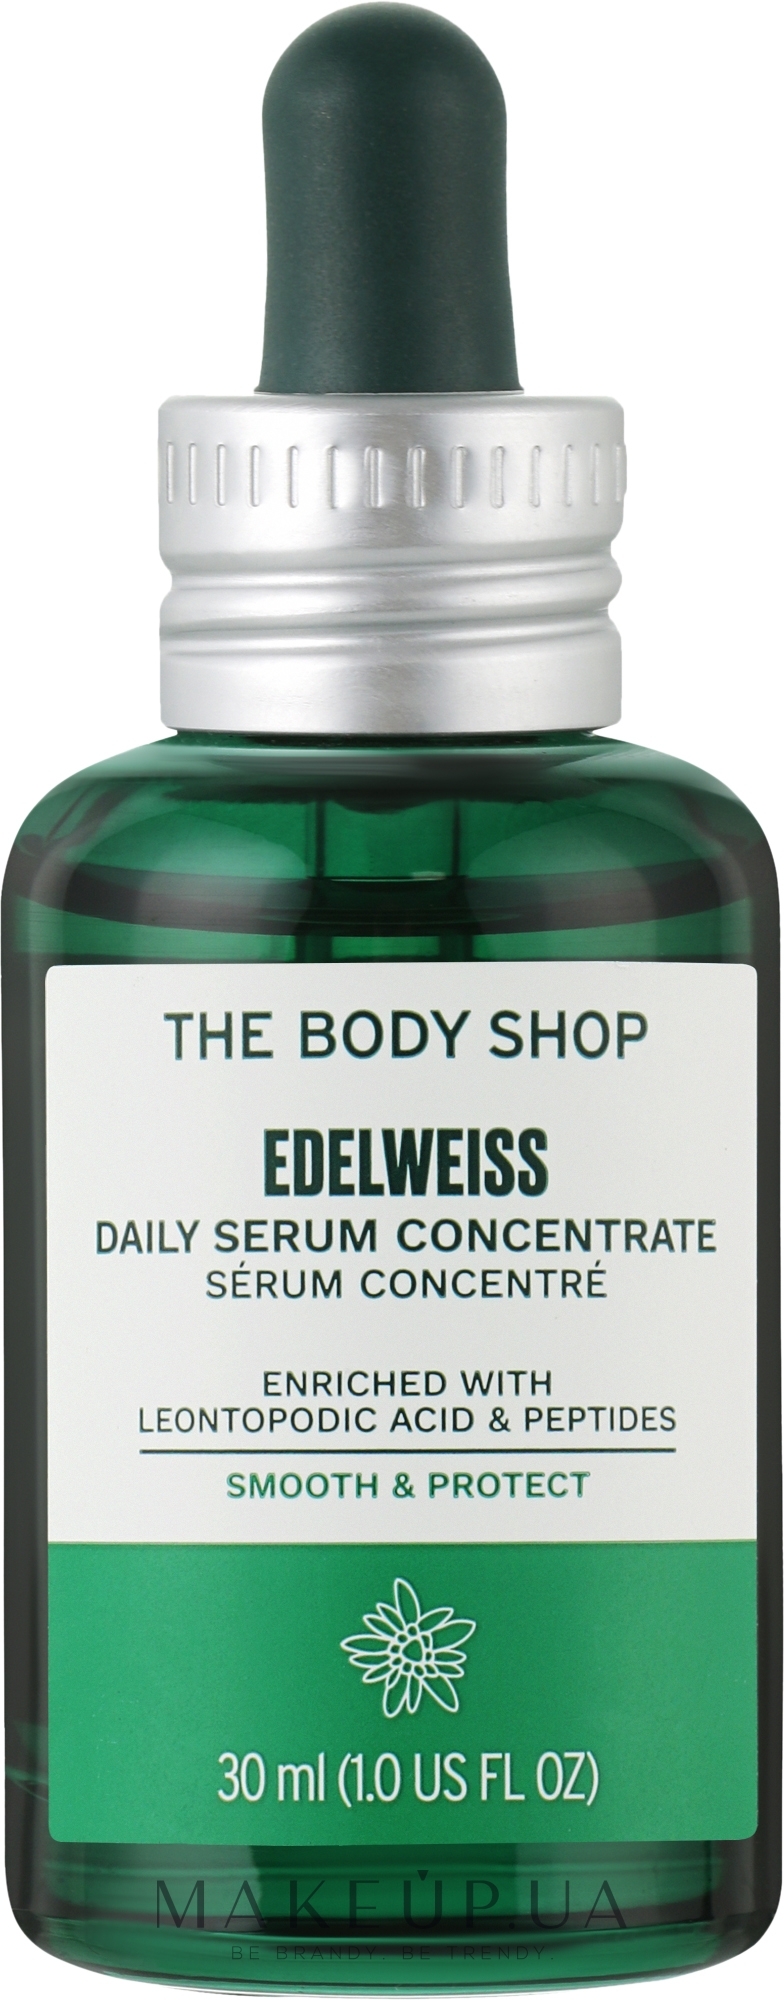 Сыворотка для лица - The Body Shop Edelweiss Daily Serum Concentrate — фото 30ml